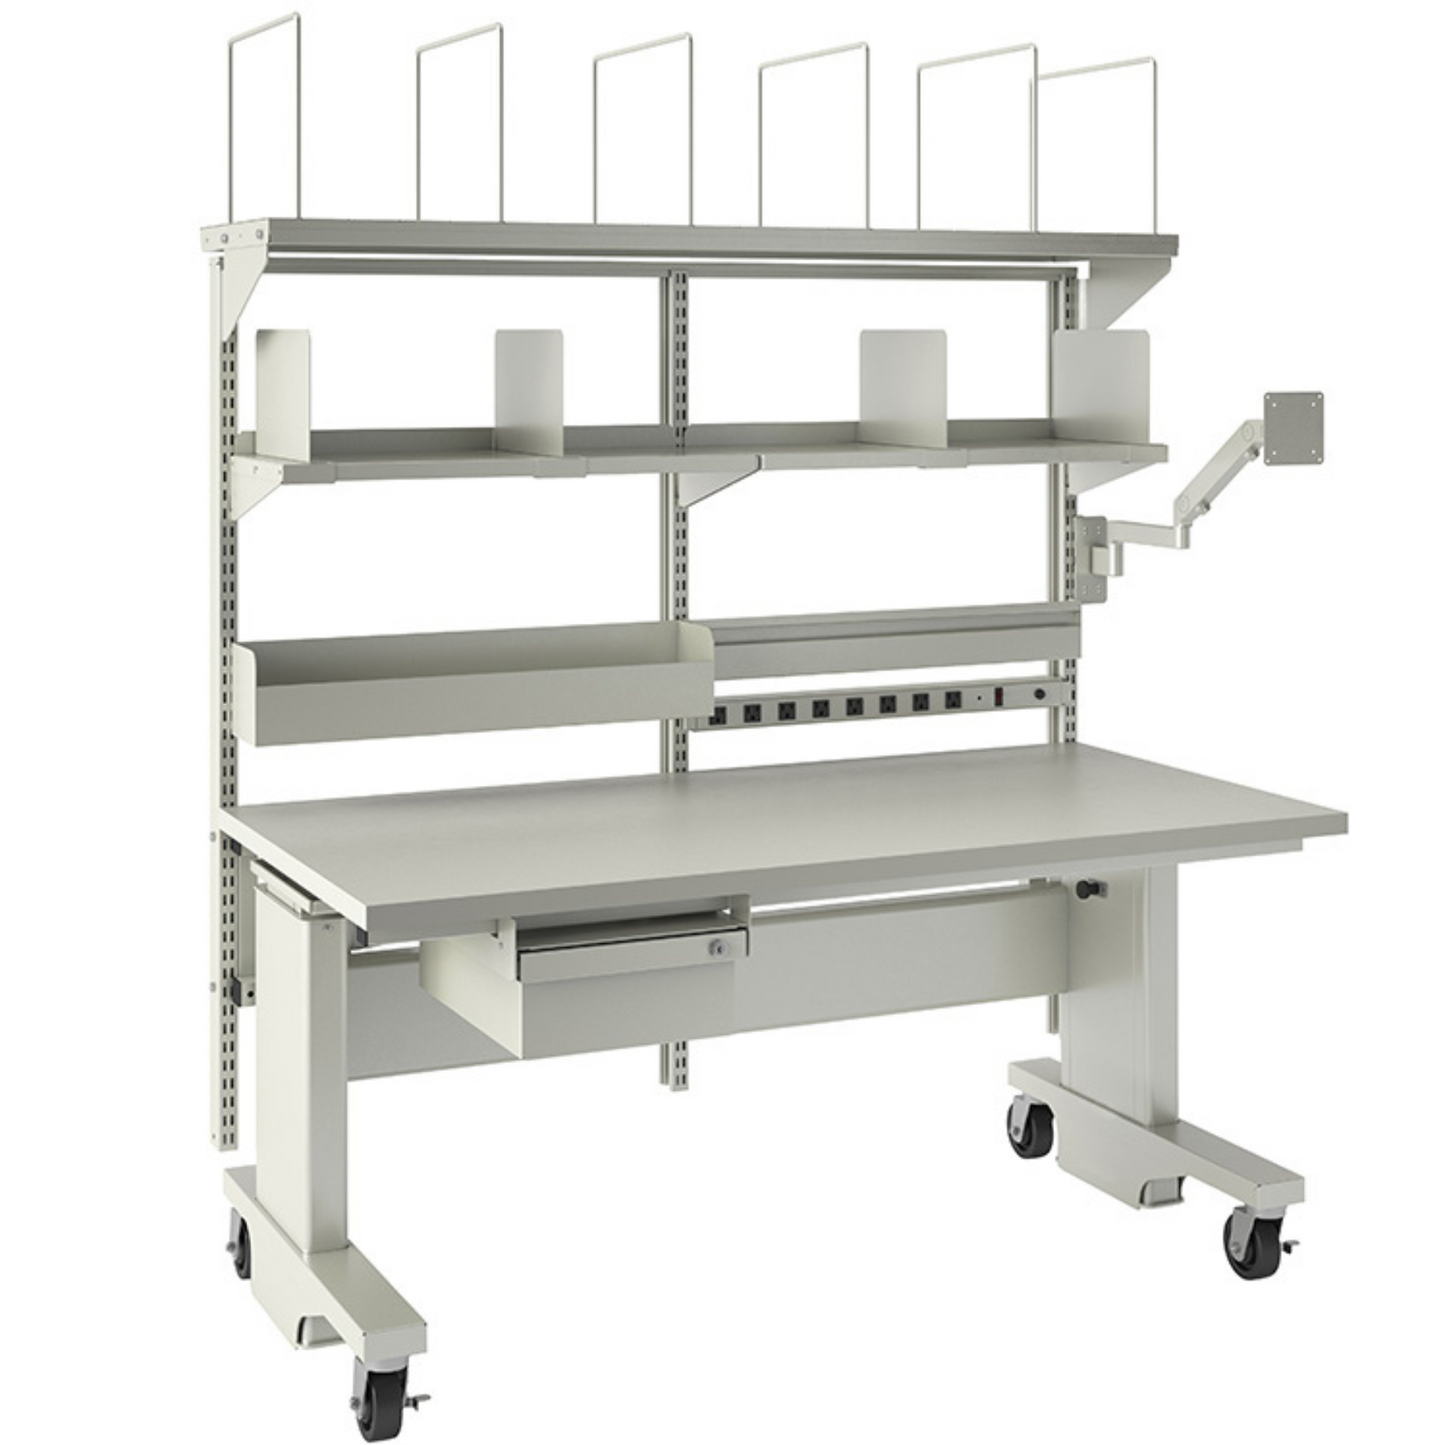 Heavy-Duty Packing Workstation - Manual Adjustment, 60"W x 30"D Top